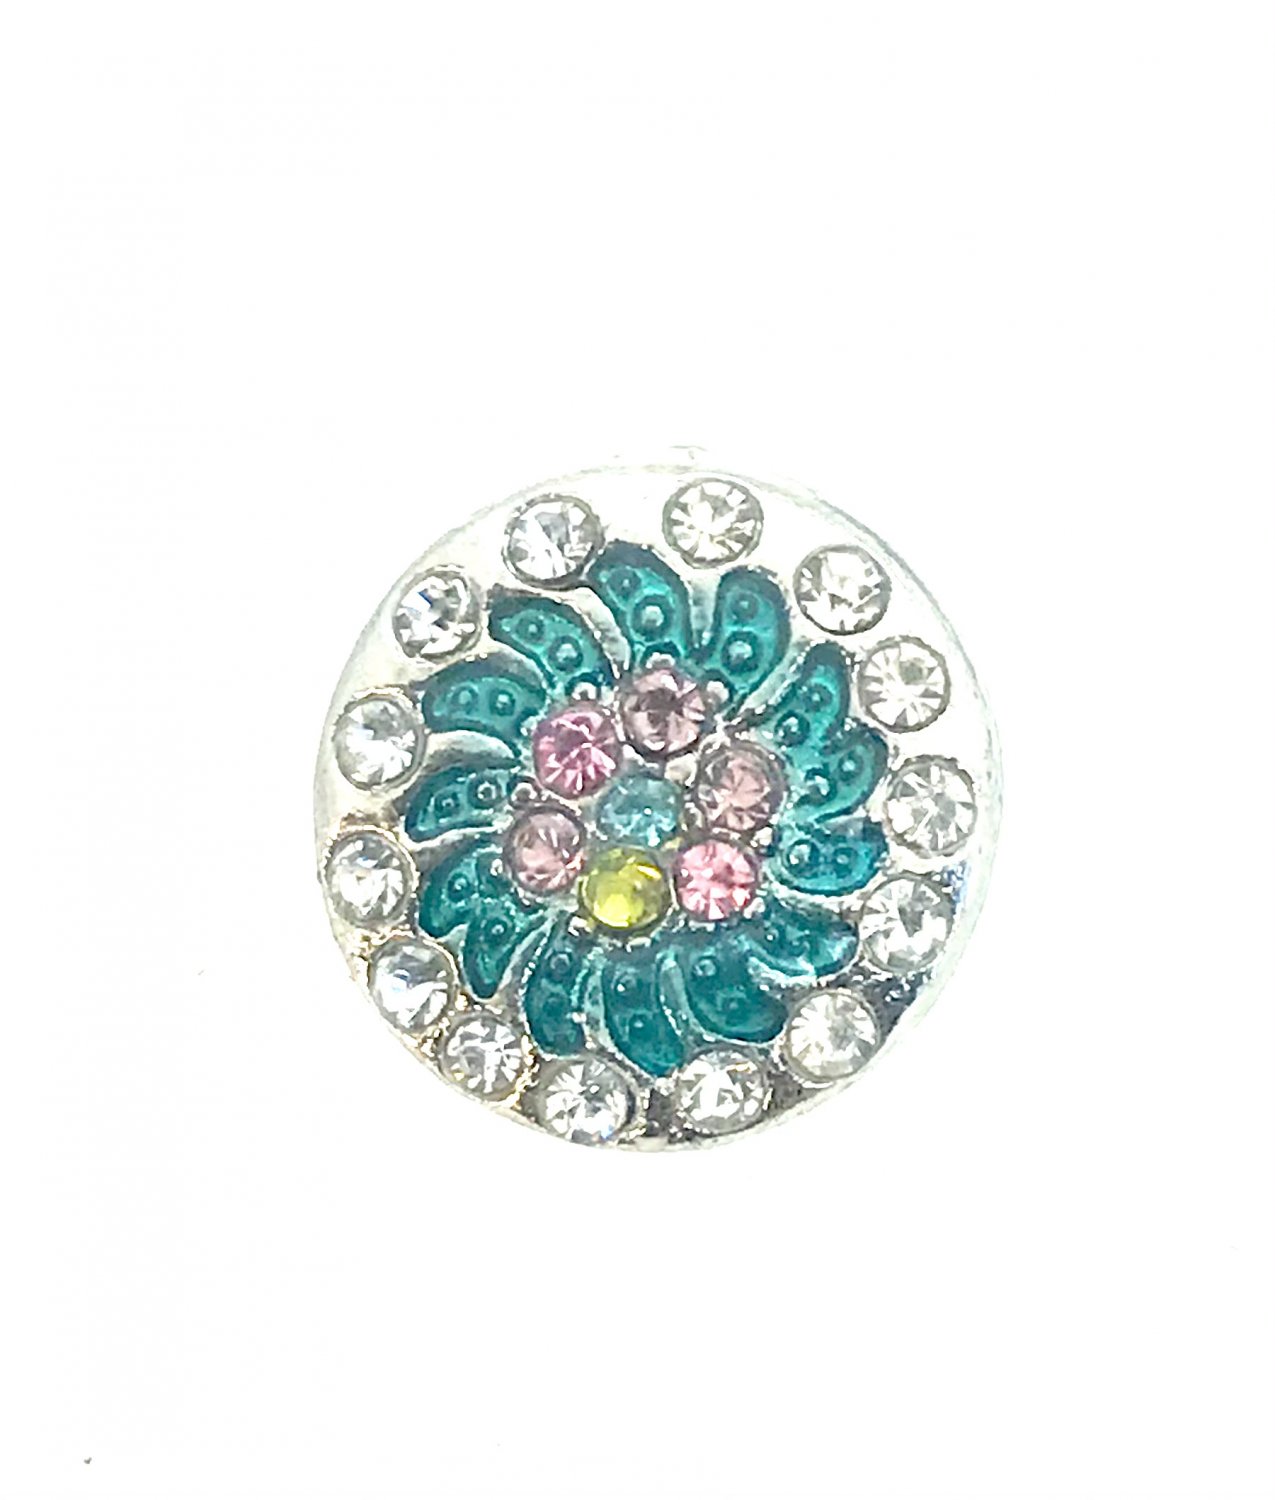 Rhinestone Mini snap button Teal blue flower crystal 12mm ginger snap  Jewelry Fast Shipping